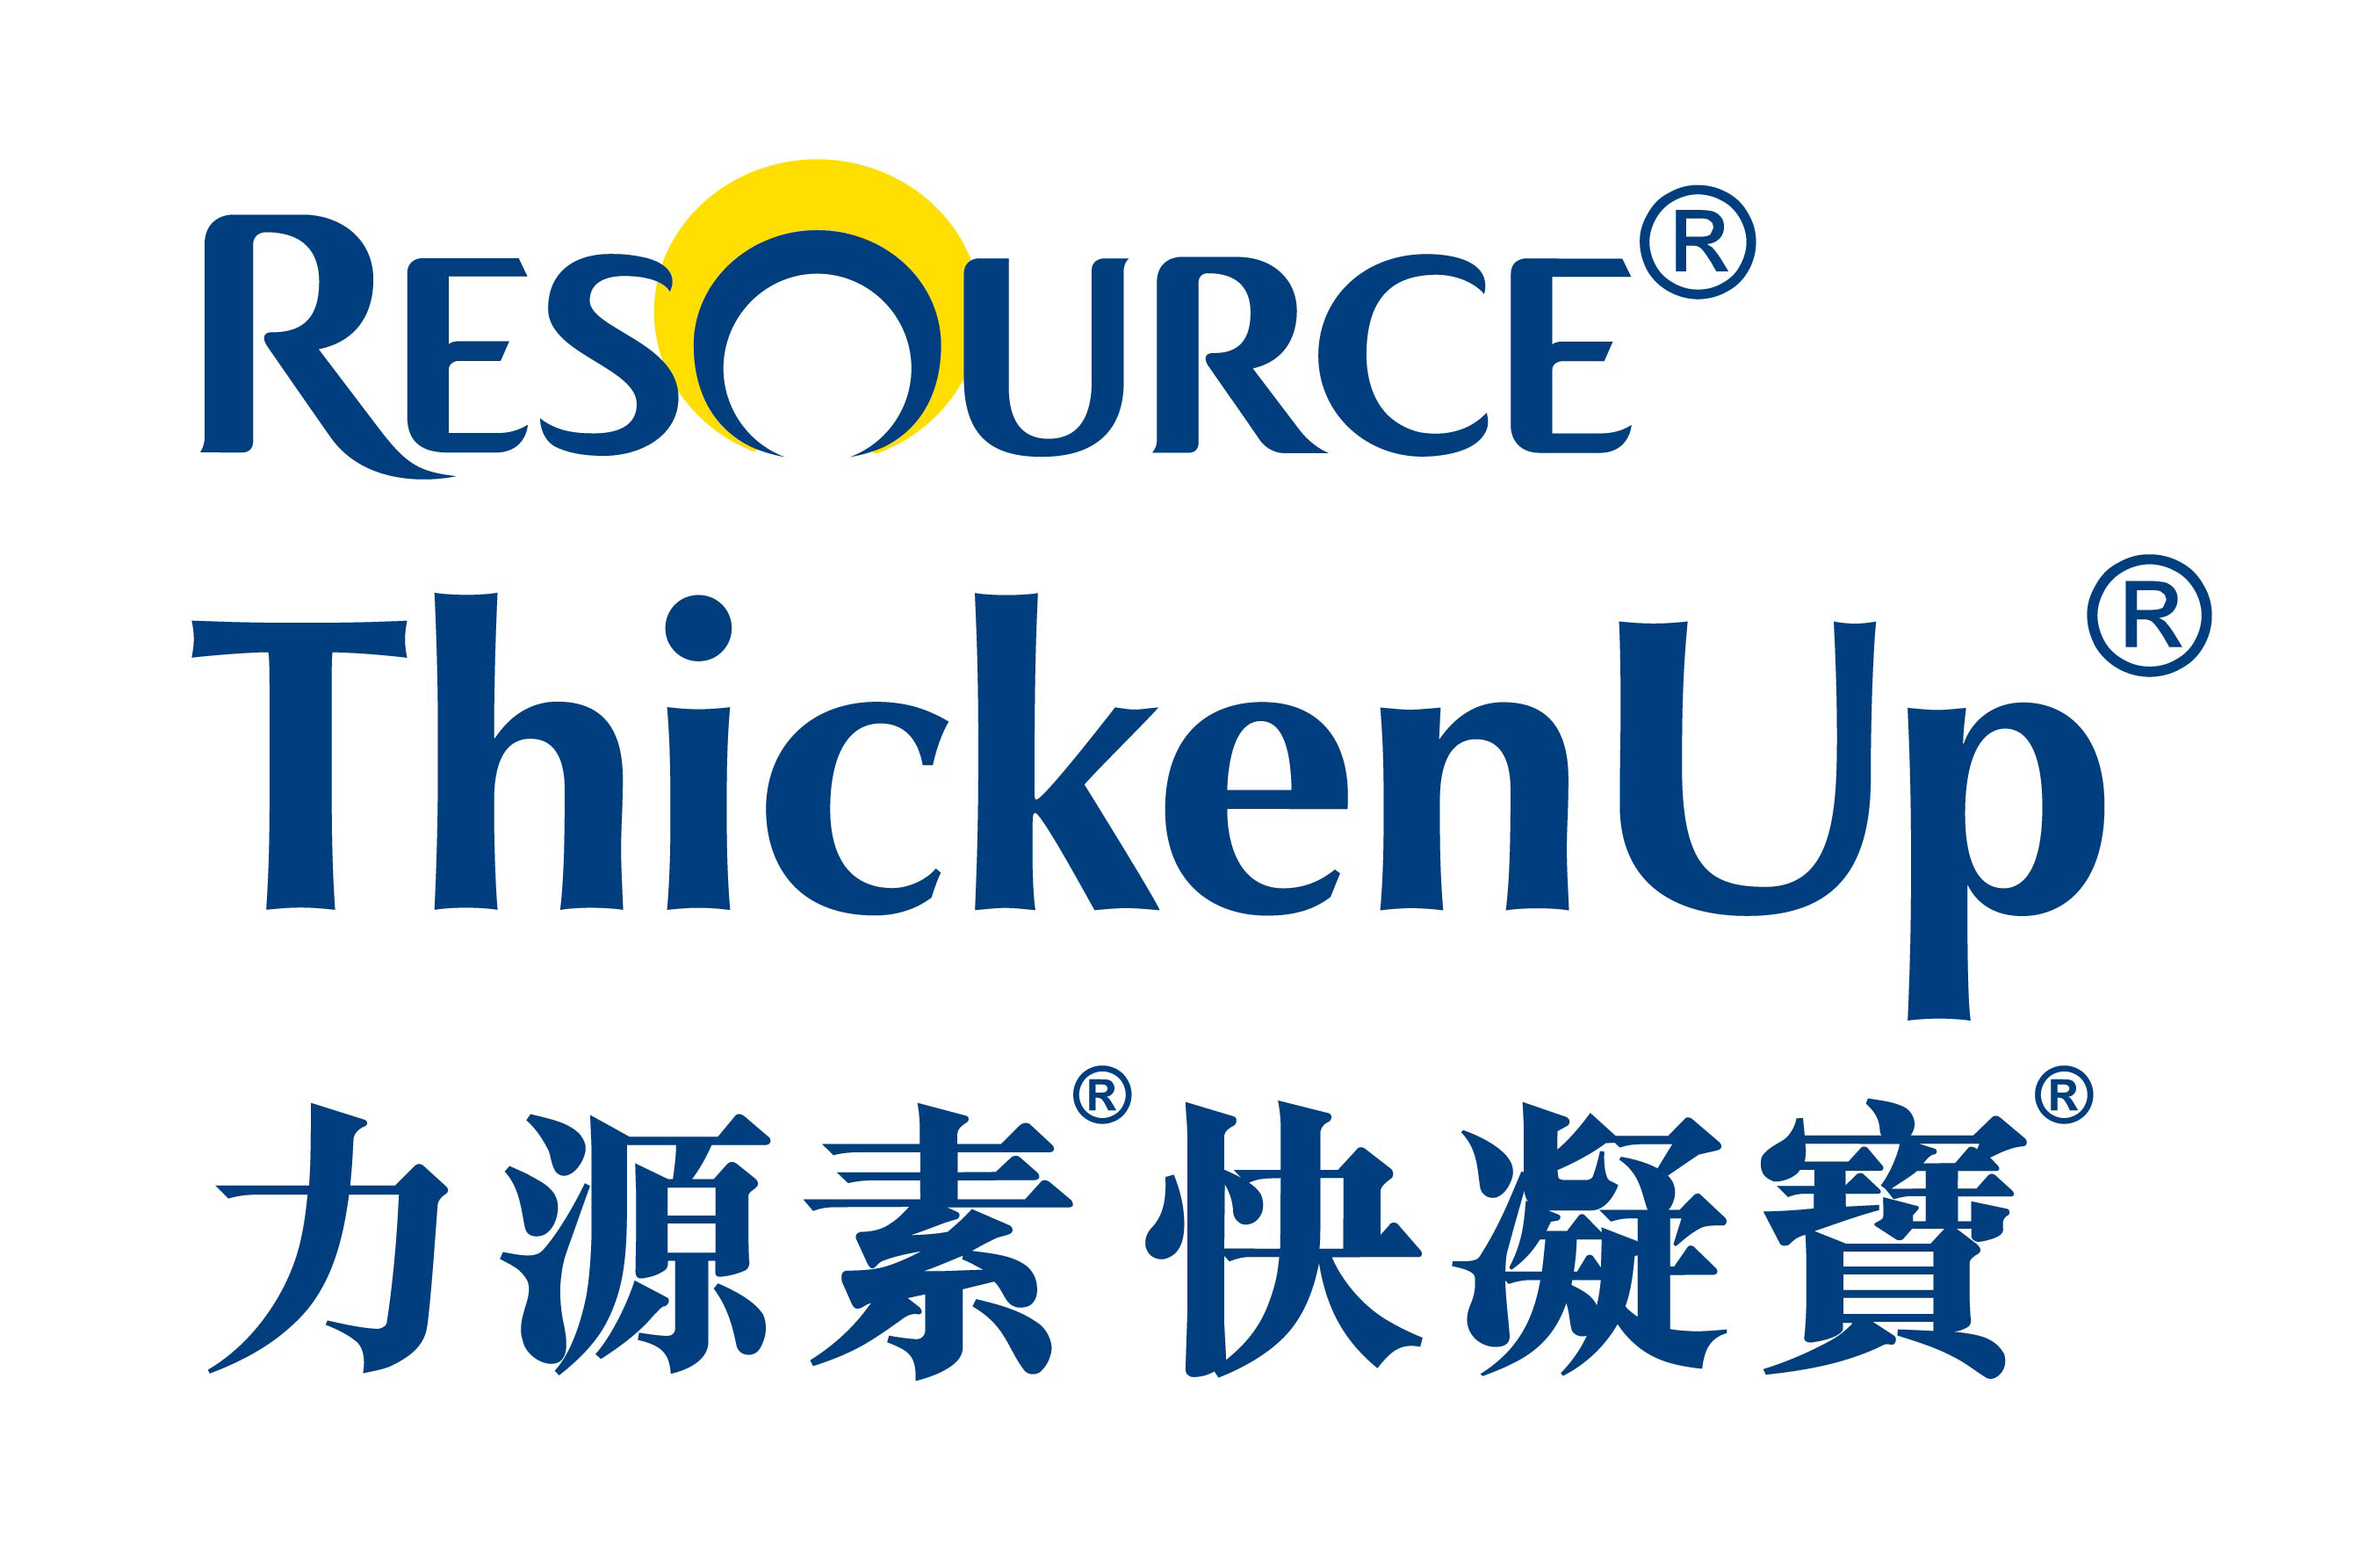 Resource Thickenup